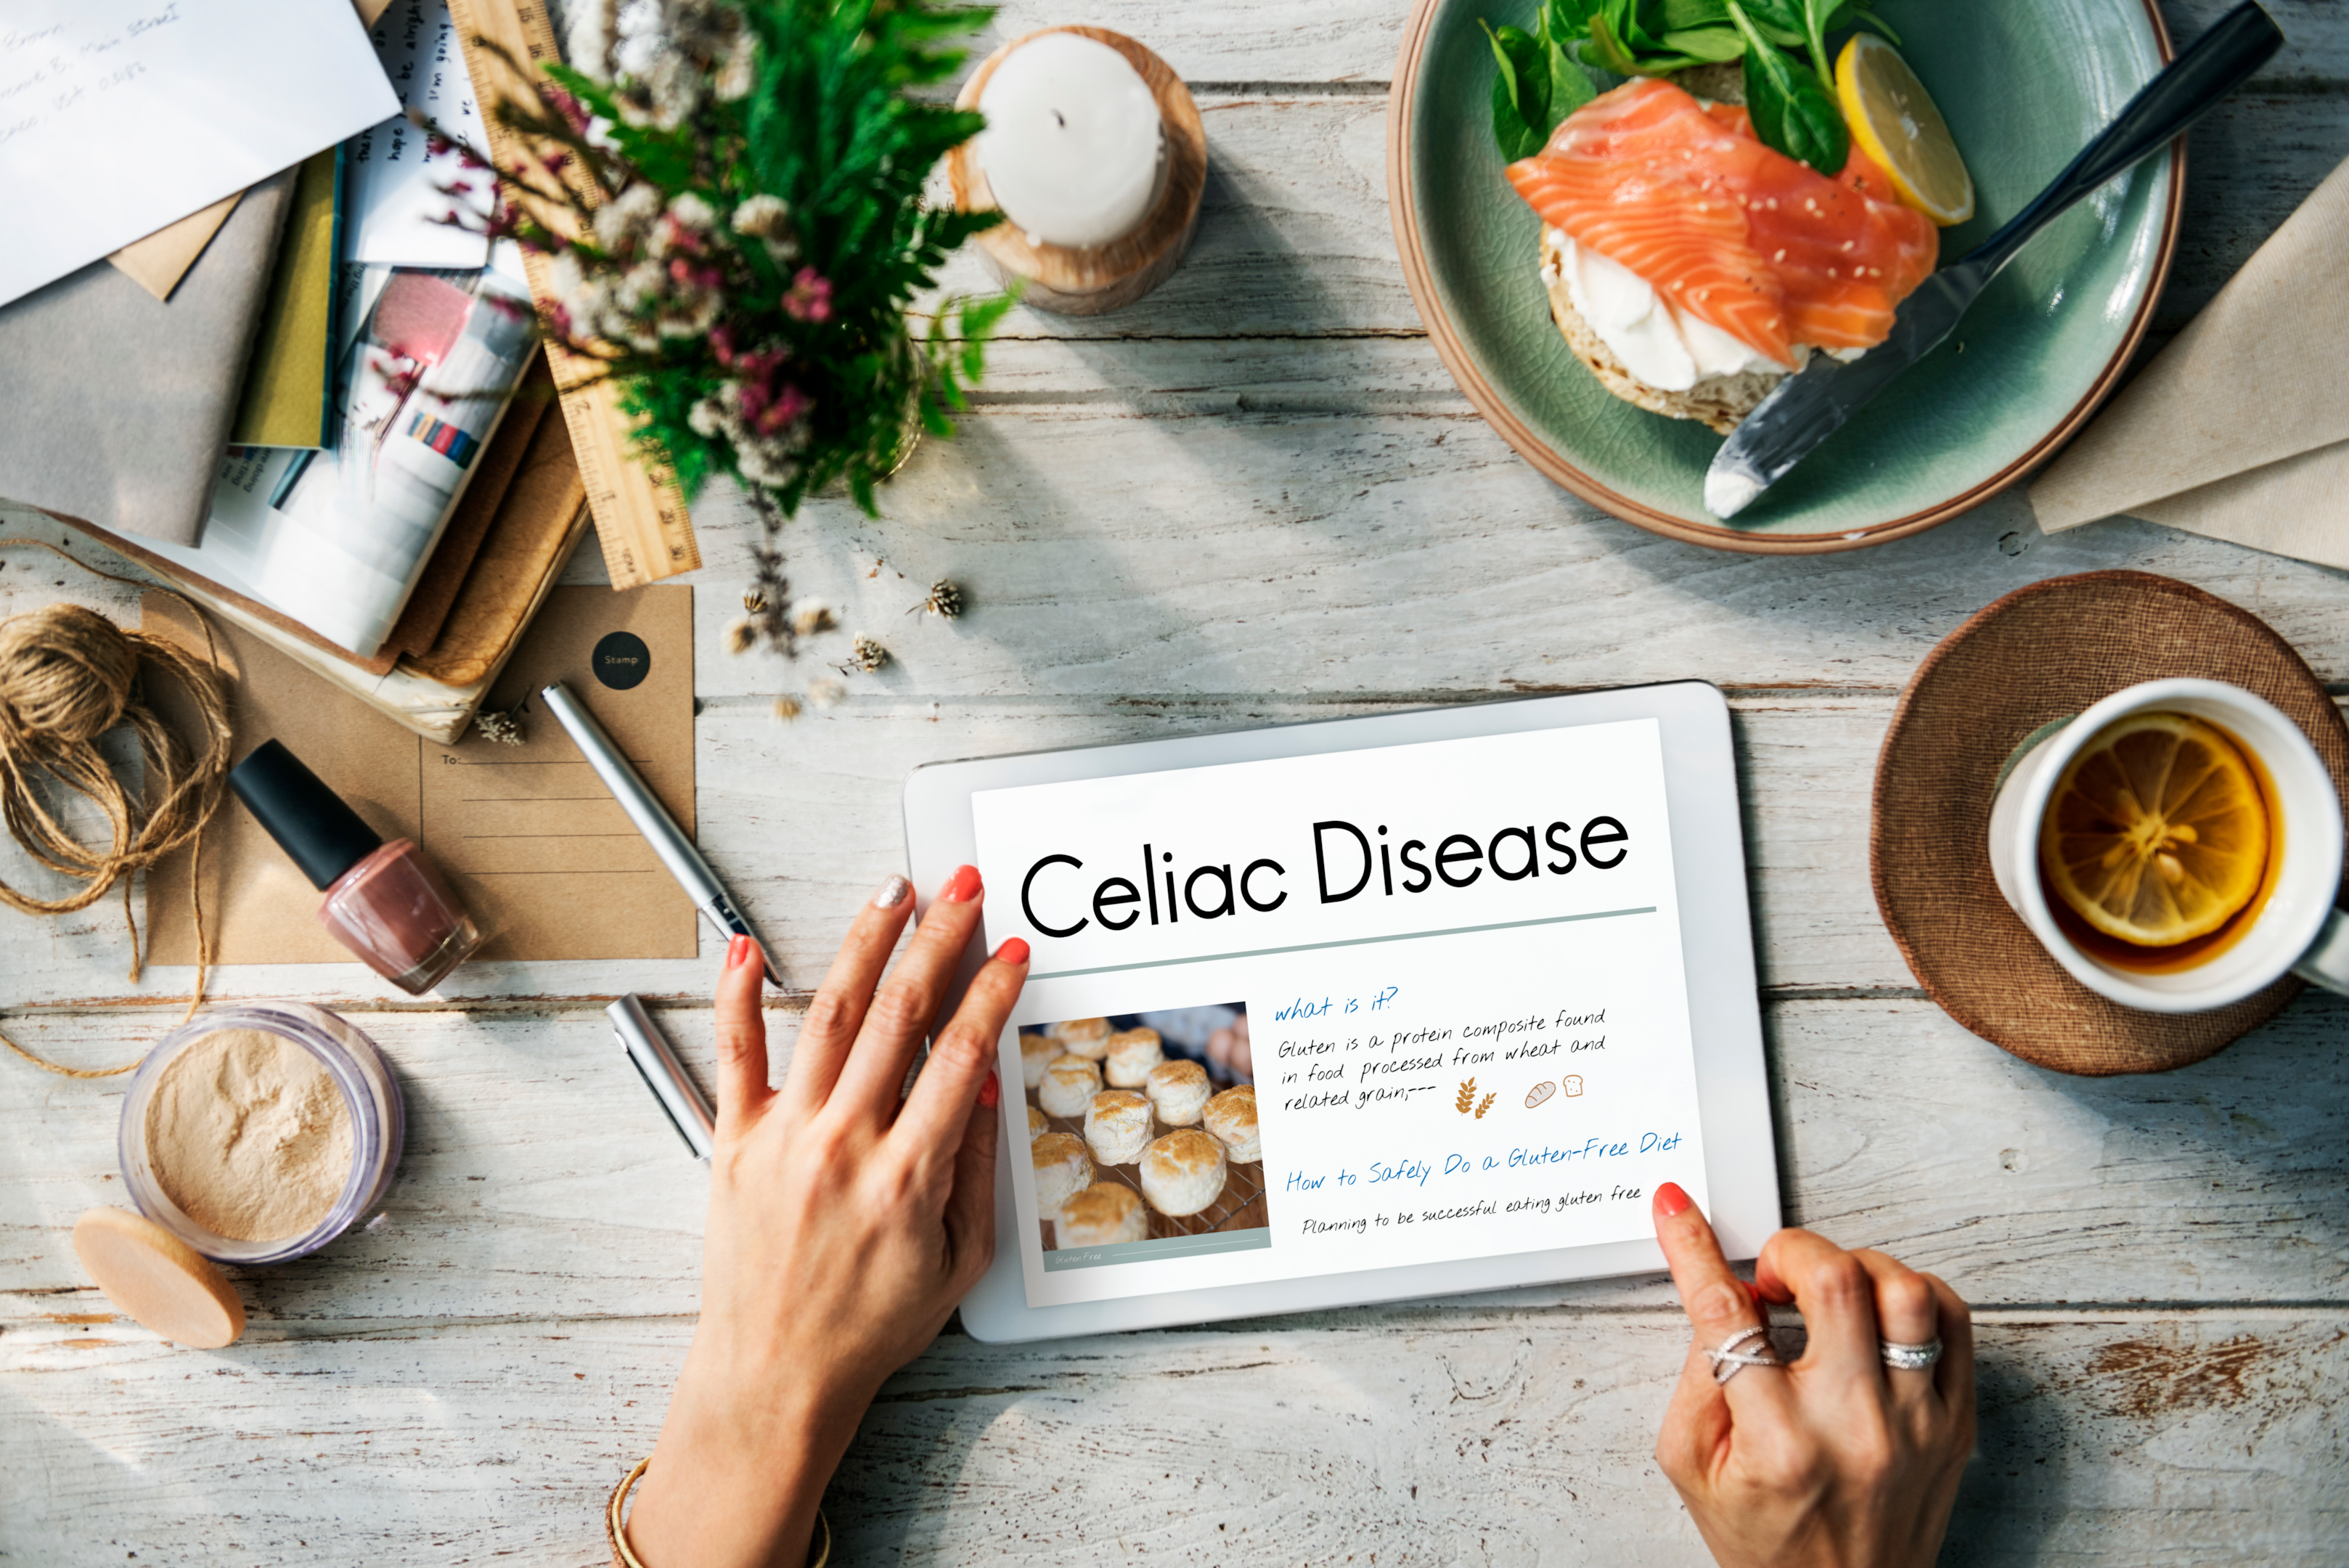 Chronic urticaria and other skin condition can be caused by untreated coeliac gluten sensitivity 